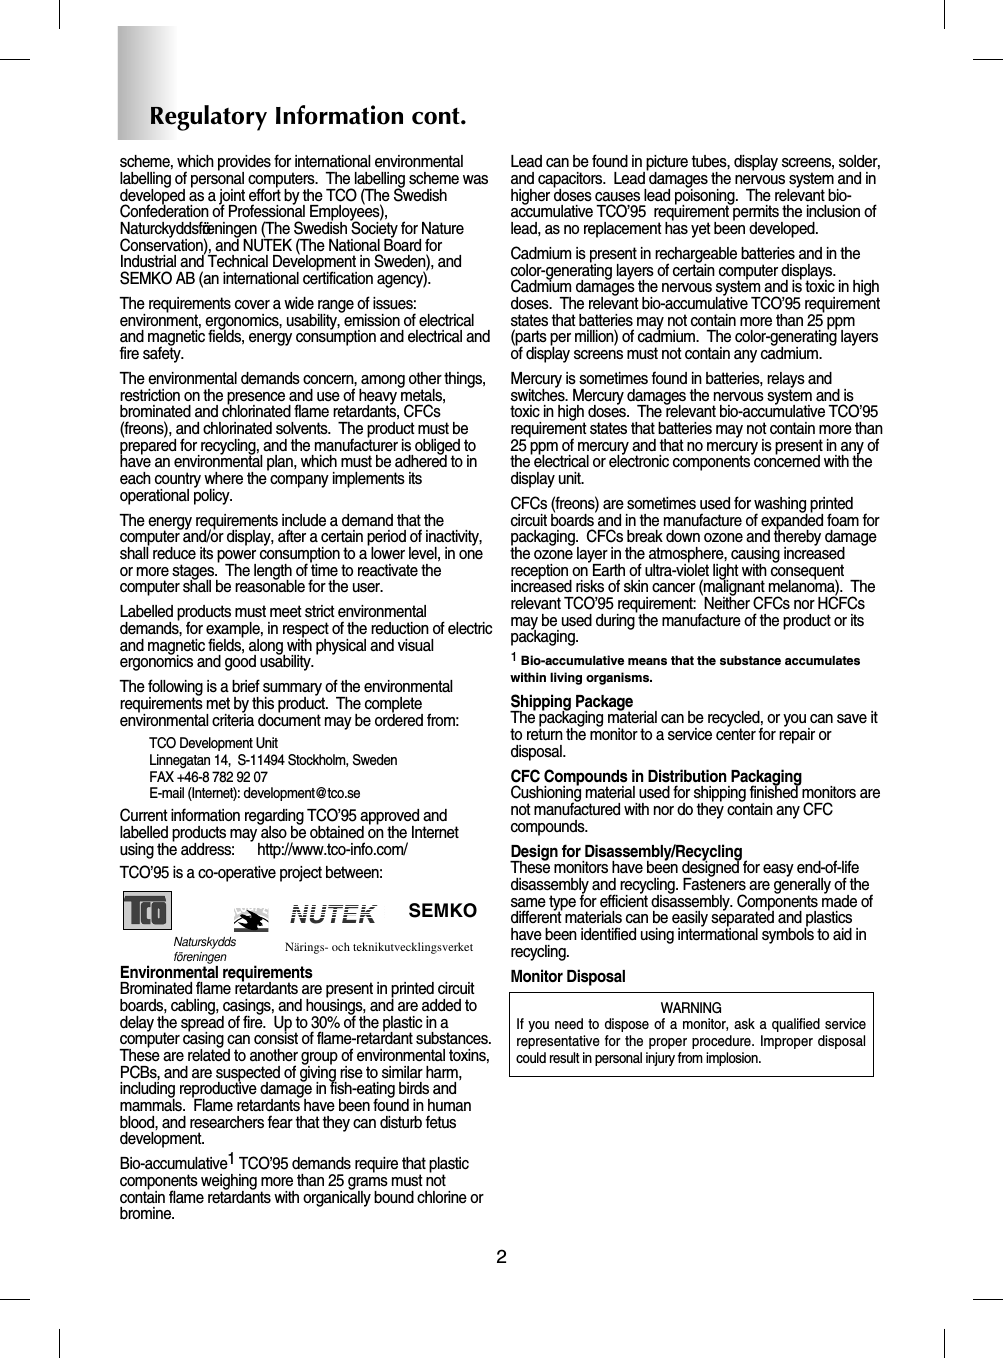 2Regulatory Information cont.NUTEKNaturskyddsföreningen Närings- och teknikutvecklingsverket SEMKOscheme, which provides for international environmentallabelling of personal computers.  The labelling scheme wasdeveloped as a joint effort by the TCO (The SwedishConfederation of Professional Employees),Naturckyddsföreningen (The Swedish Society for NatureConservation), and NUTEK (The National Board forIndustrial and Technical Development in Sweden), andSEMKO AB (an international certification agency).The requirements cover a wide range of issues:environment, ergonomics, usability, emission of electricaland magnetic fields, energy consumption and electrical andfire safety.The environmental demands concern, among other things,restriction on the presence and use of heavy metals,brominated and chlorinated flame retardants, CFCs(freons), and chlorinated solvents.  The product must beprepared for recycling, and the manufacturer is obliged tohave an environmental plan, which must be adhered to ineach country where the company implements itsoperational policy.  The energy requirements include a demand that thecomputer and/or display, after a certain period of inactivity,shall reduce its power consumption to a lower level, in oneor more stages.  The length of time to reactivate thecomputer shall be reasonable for the user.Labelled products must meet strict environmentaldemands, for example, in respect of the reduction of electricand magnetic fields, along with physical and visualergonomics and good usability.The following is a brief summary of the environmentalrequirements met by this product.  The completeenvironmental criteria document may be ordered from:TCO Development UnitLinnegatan 14,  S-11494 Stockholm, SwedenFAX +46-8 782 92 07E-mail (Internet): development@tco.seCurrent information regarding TCO’95 approved andlabelled products may also be obtained on the Internetusing the address:      http://www.tco-info.com/TCO’95 is a co-operative project between:Environmental requirementsBrominated flame retardants are present in printed circuitboards, cabling, casings, and housings, and are added todelay the spread of fire.  Up to 30% of the plastic in acomputer casing can consist of flame-retardant substances.These are related to another group of environmental toxins,PCBs, and are suspected of giving rise to similar harm,including reproductive damage in fish-eating birds andmammals.  Flame retardants have been found in humanblood, and researchers fear that they can disturb fetusdevelopment.  Bio-accumulative1TCO’95 demands require that plasticcomponents weighing more than 25 grams must notcontain flame retardants with organically bound chlorine orbromine.Lead can be found in picture tubes, display screens, solder,and capacitors.  Lead damages the nervous system and inhigher doses causes lead poisoning.  The relevant bio-accumulative TCO’95  requirement permits the inclusion oflead, as no replacement has yet been developed.Cadmium is present in rechargeable batteries and in thecolor-generating layers of certain computer displays.Cadmium damages the nervous system and is toxic in highdoses.  The relevant bio-accumulative TCO’95 requirementstates that batteries may not contain more than 25 ppm(parts per million) of cadmium.  The color-generating layersof display screens must not contain any cadmium.Mercury is sometimes found in batteries, relays andswitches. Mercury damages the nervous system and istoxic in high doses.  The relevant bio-accumulative TCO’95requirement states that batteries may not contain more than 25 ppm of mercury and that no mercury is present in any ofthe electrical or electronic components concerned with thedisplay unit.CFCs (freons) are sometimes used for washing printedcircuit boards and in the manufacture of expanded foam forpackaging.  CFCs break down ozone and thereby damagethe ozone layer in the atmosphere, causing increasedreception on Earth of ultra-violet light with consequentincreased risks of skin cancer (malignant melanoma).  Therelevant TCO’95 requirement:  Neither CFCs nor HCFCsmay be used during the manufacture of the product or itspackaging.1Bio-accumulative means that the substance accumulateswithin living organisms.Shipping PackageThe packaging material can be recycled, or you can save itto return the monitor to a service center for repair ordisposal.CFC Compounds in Distribution PackagingCushioning material used for shipping finished monitors arenot manufactured with nor do they contain any CFCcompounds.Design for Disassembly/RecyclingThese monitors have been designed for easy end-of-lifedisassembly and recycling. Fasteners are generally of thesame type for efficient disassembly. Components made ofdifferent materials can be easily separated and plasticshave been identified using intermational symbols to aid inrecycling.Monitor DisposalWARNINGIf you need to dispose of a monitor, ask a qualified servicerepresentative for the proper procedure. Improper disposalcould result in personal injury from implosion. 